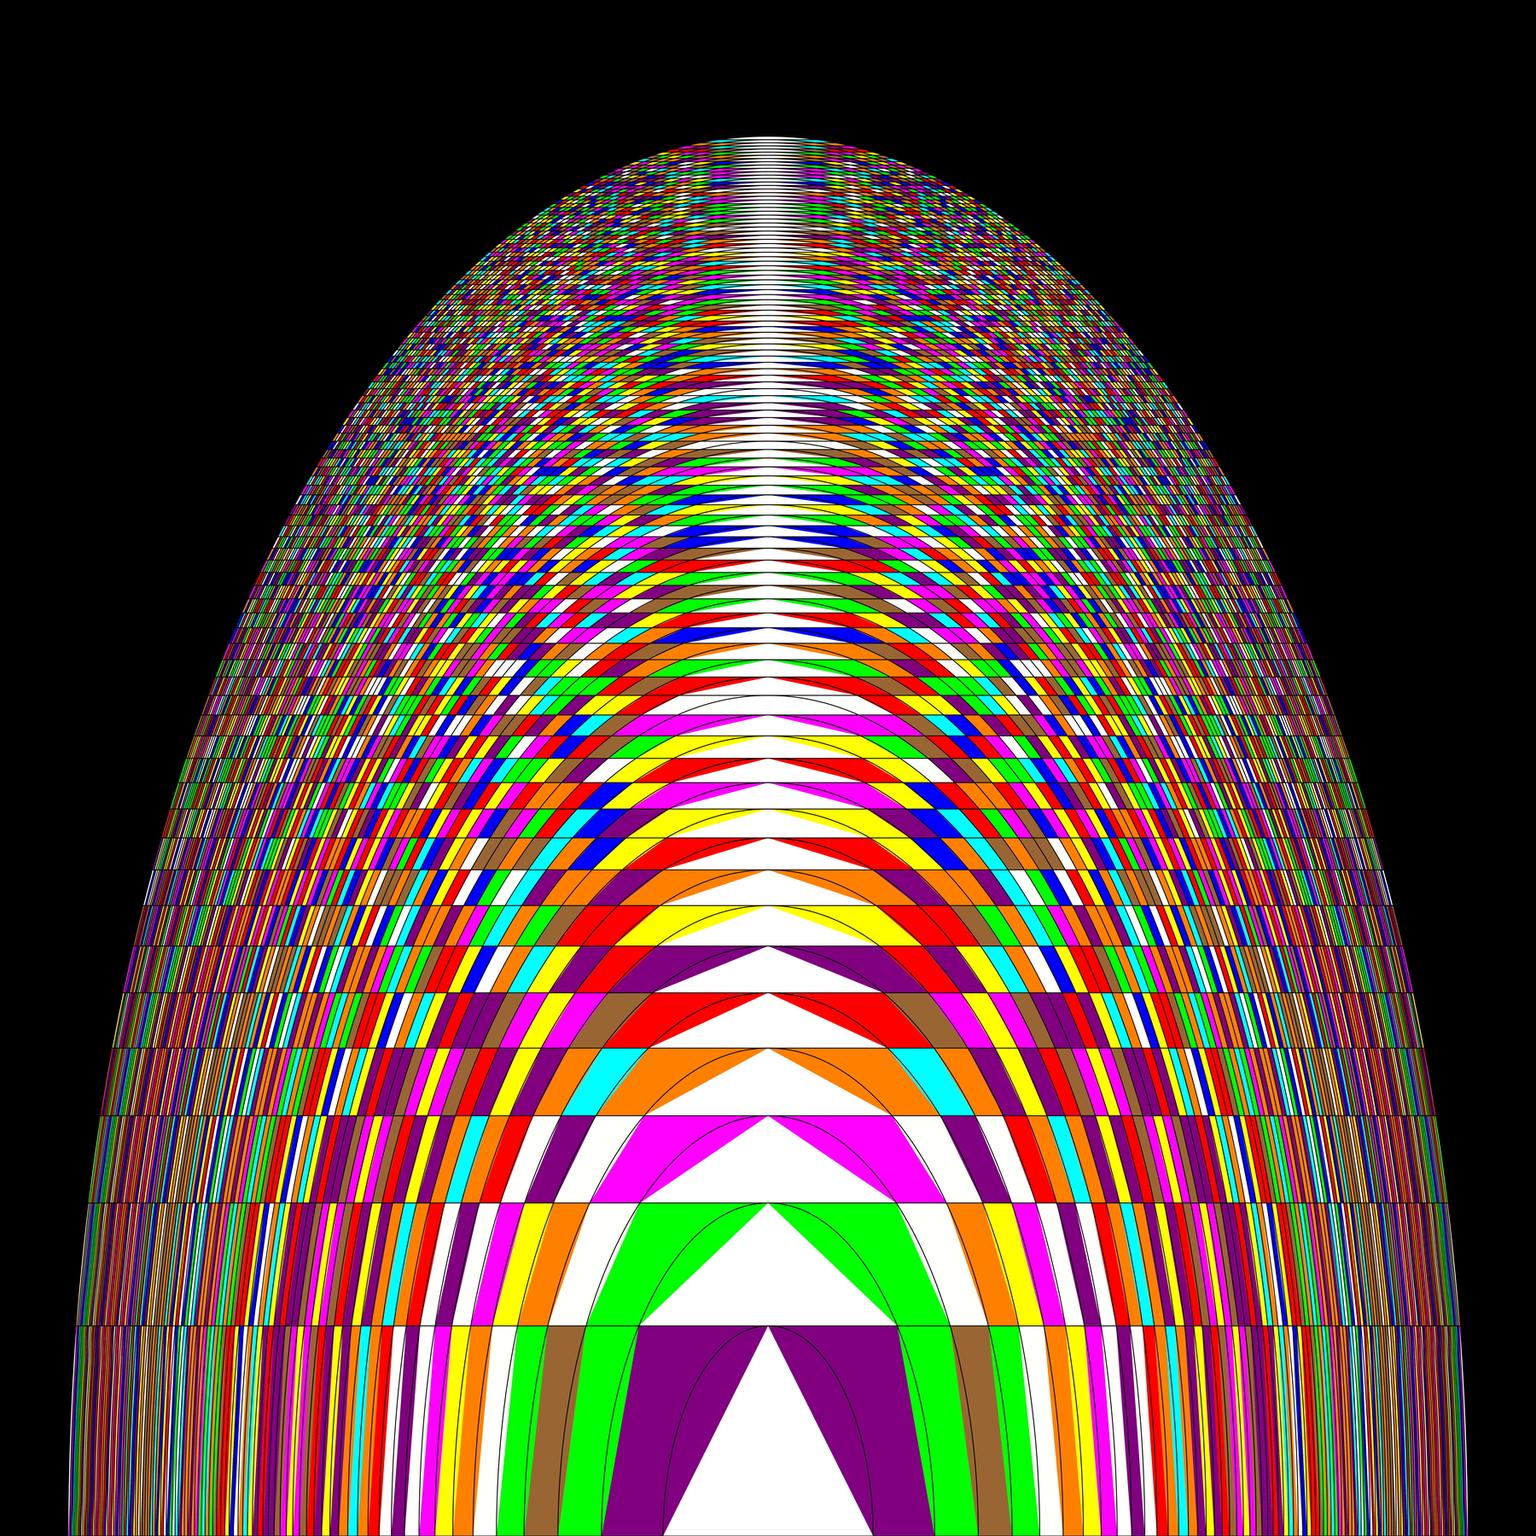 Image for entry 'Logarithmic Dome Colored with π'